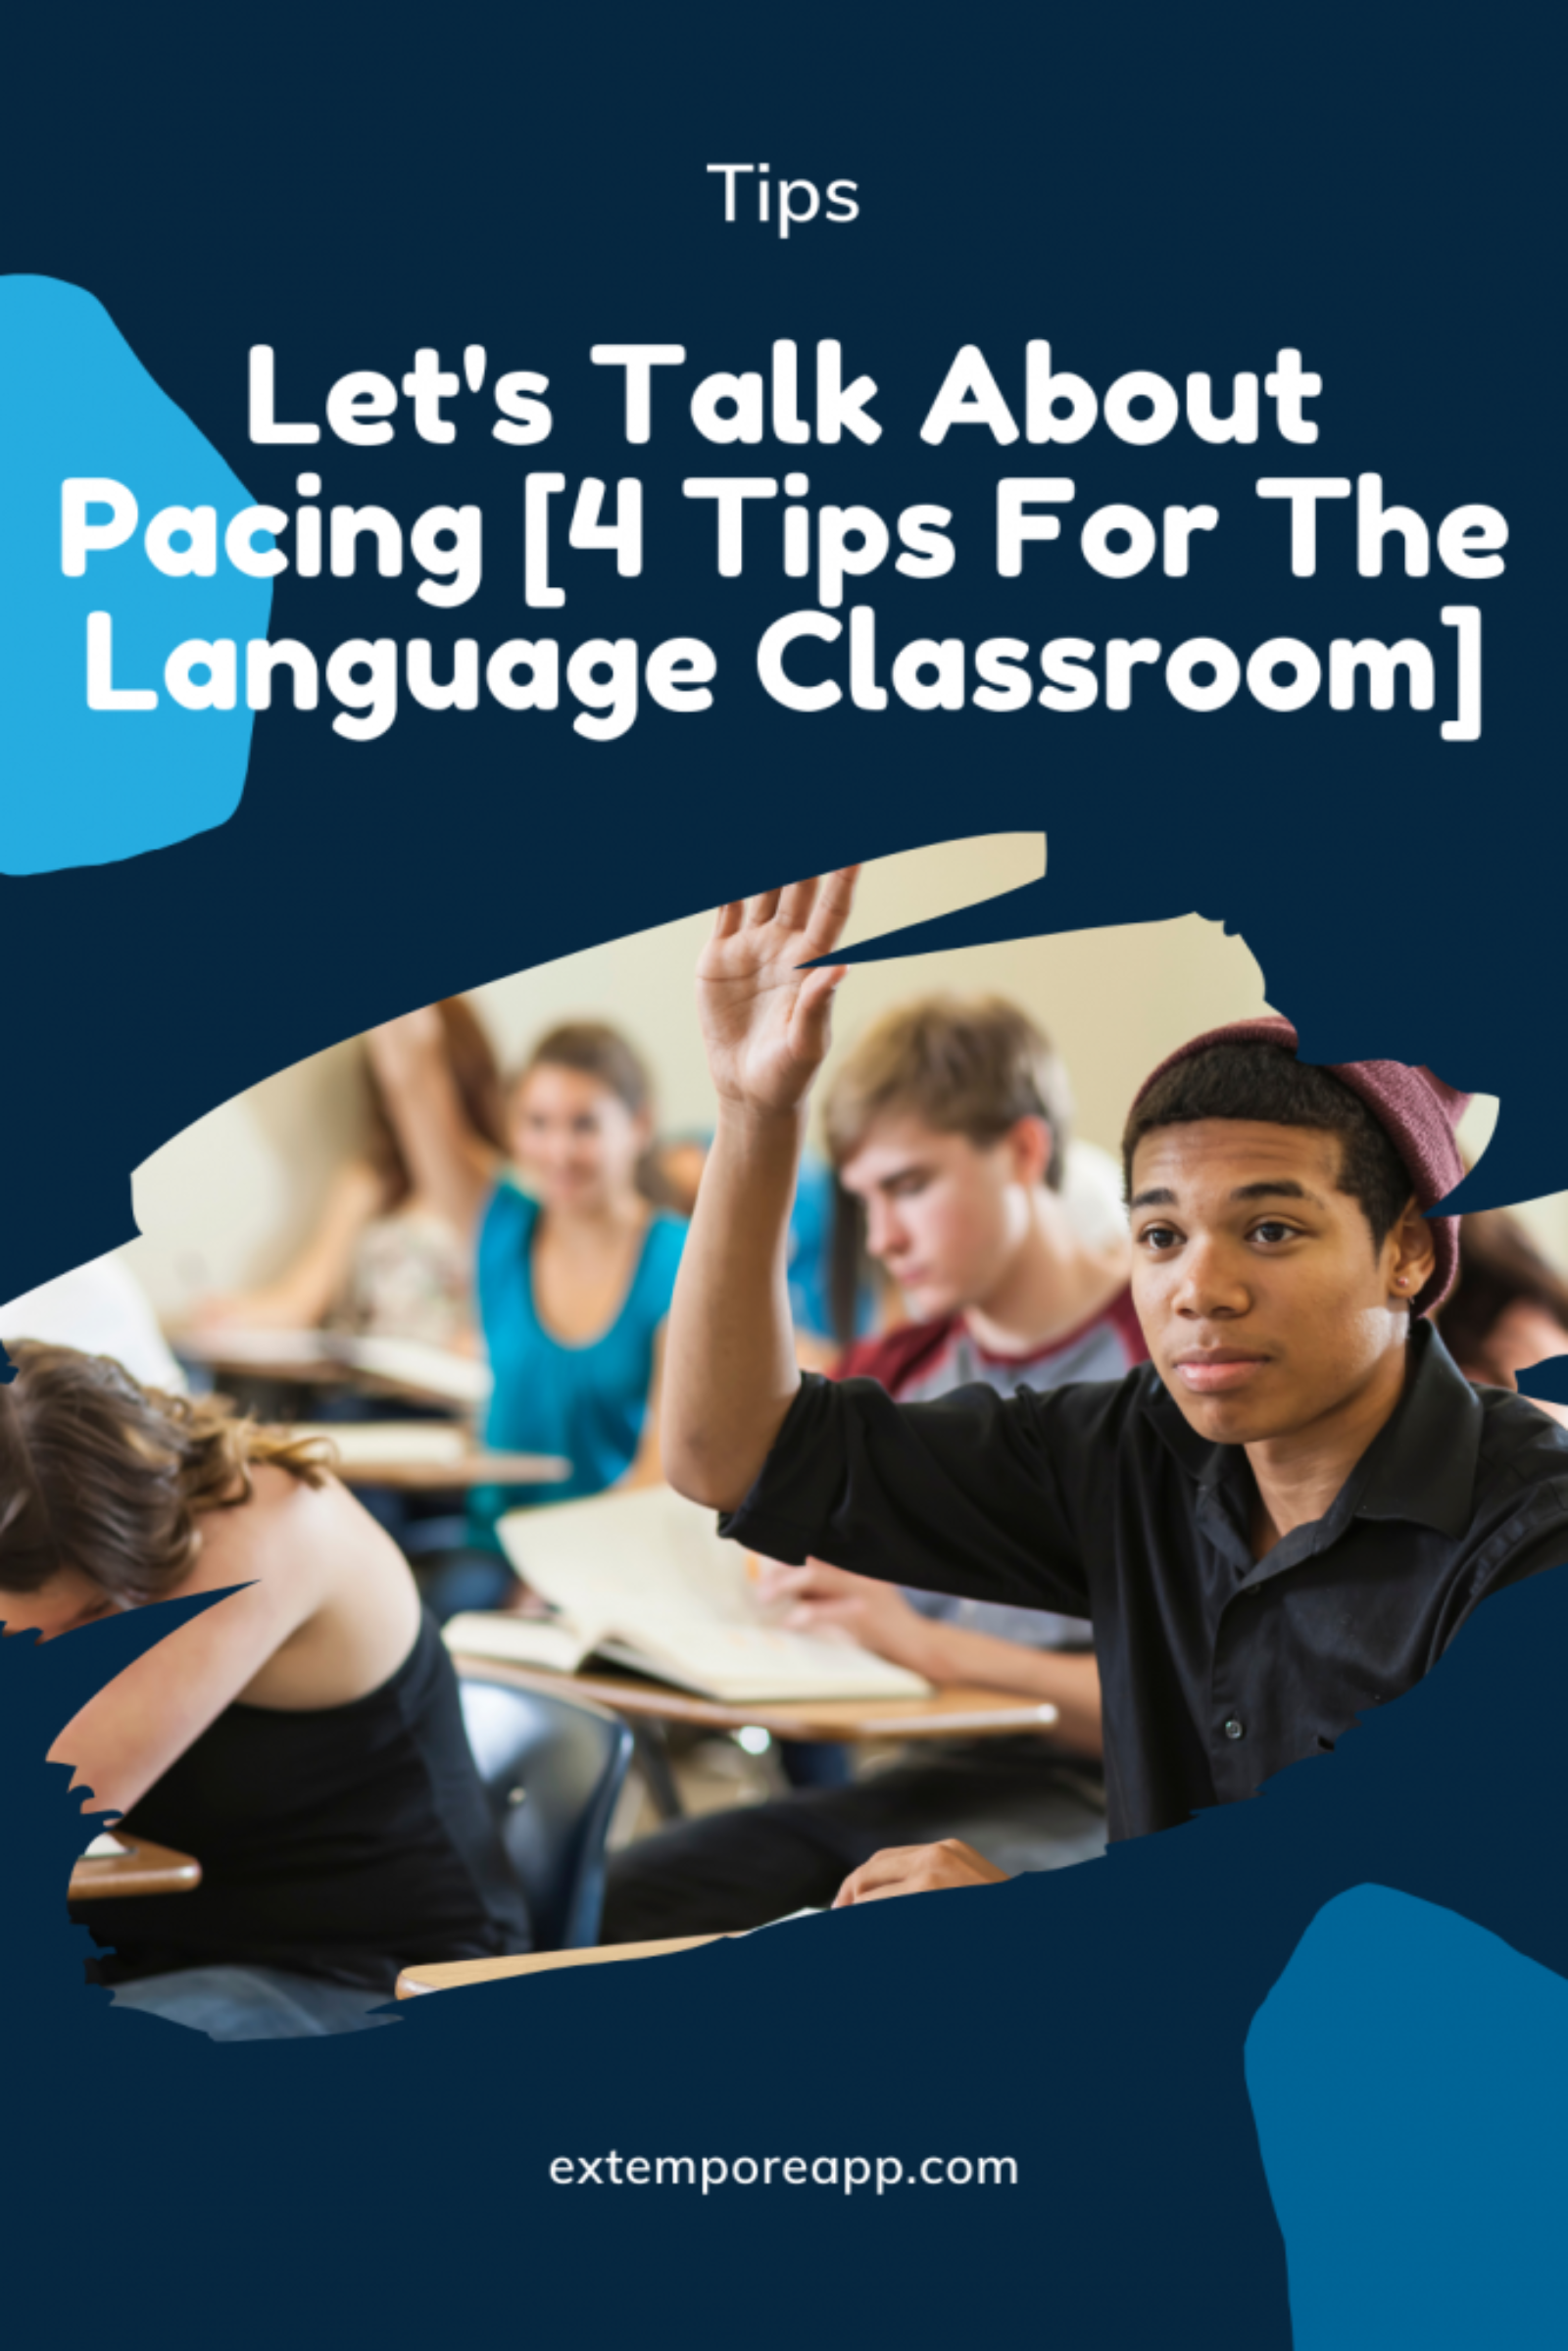 Pacing 4 Tips For The Language Classroom 683x1024